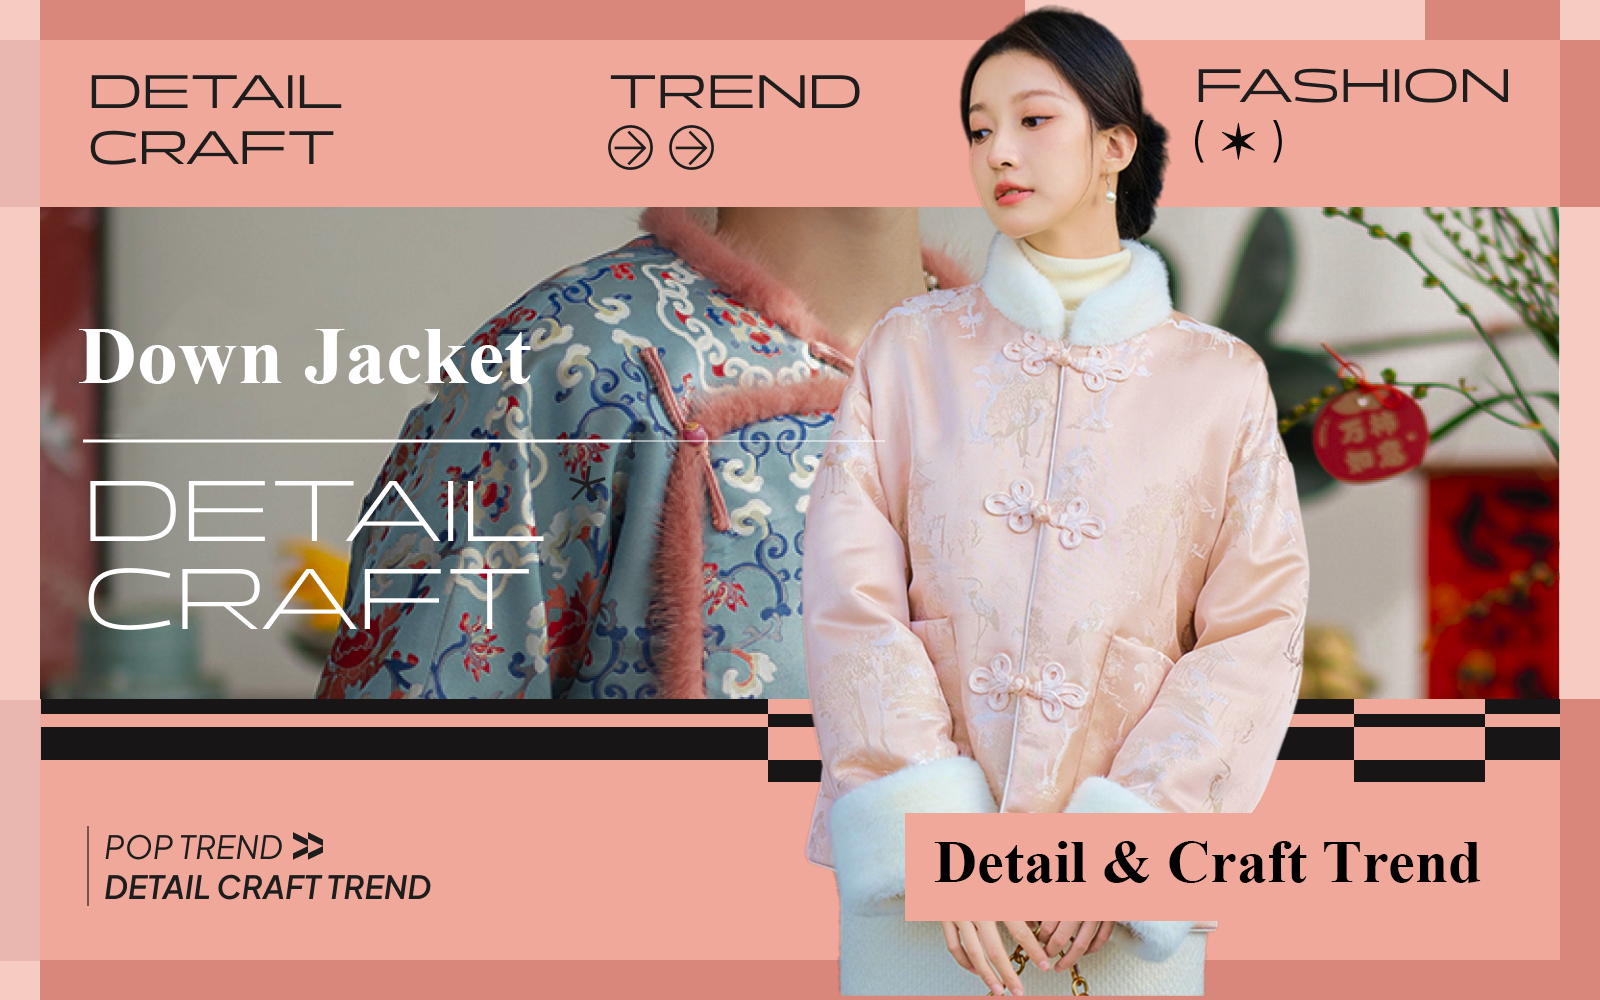 New Chinese Style -- The Detail & Craft Trend for Women's Down Jacket